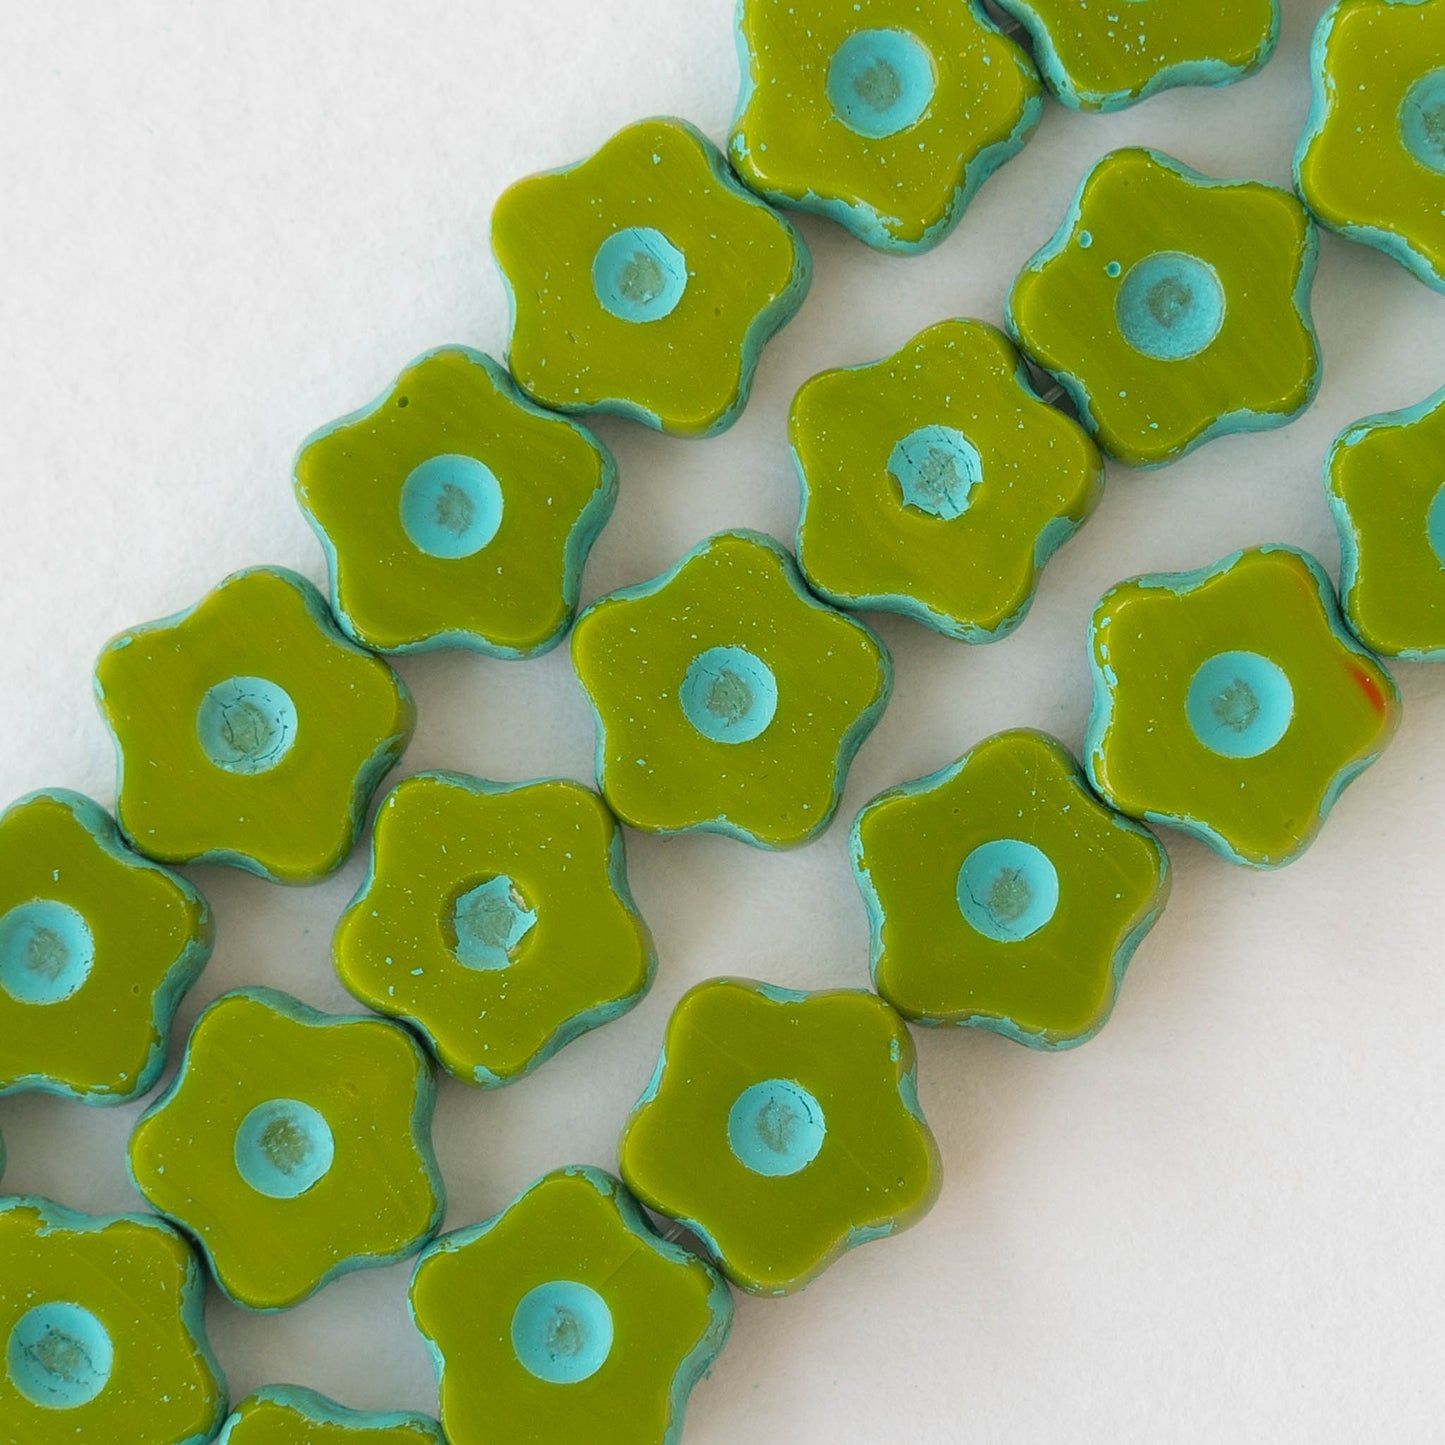 11mm Glass Flower Bead - Opaque Olive with Turquoise Wash - 10 Beads